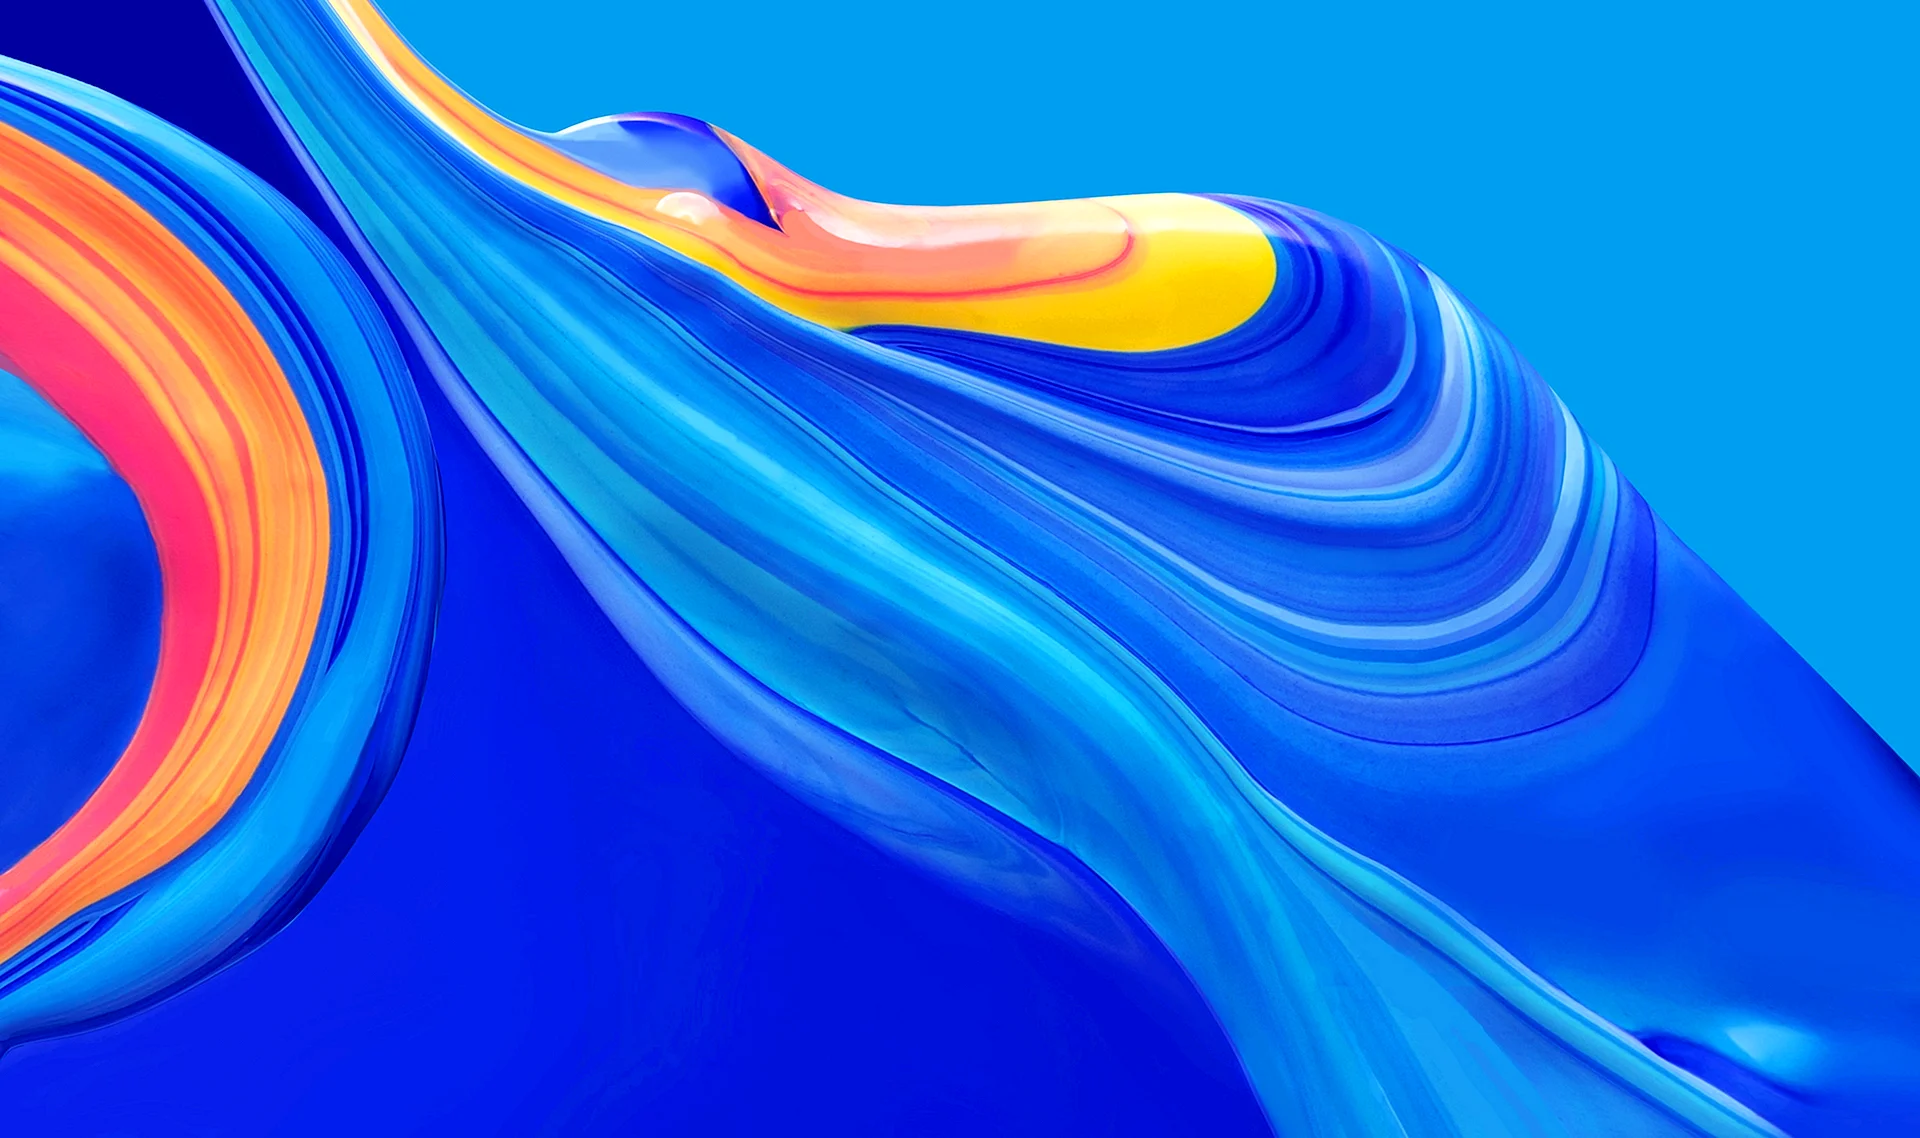 Abstract Liquid Background Wallpaper